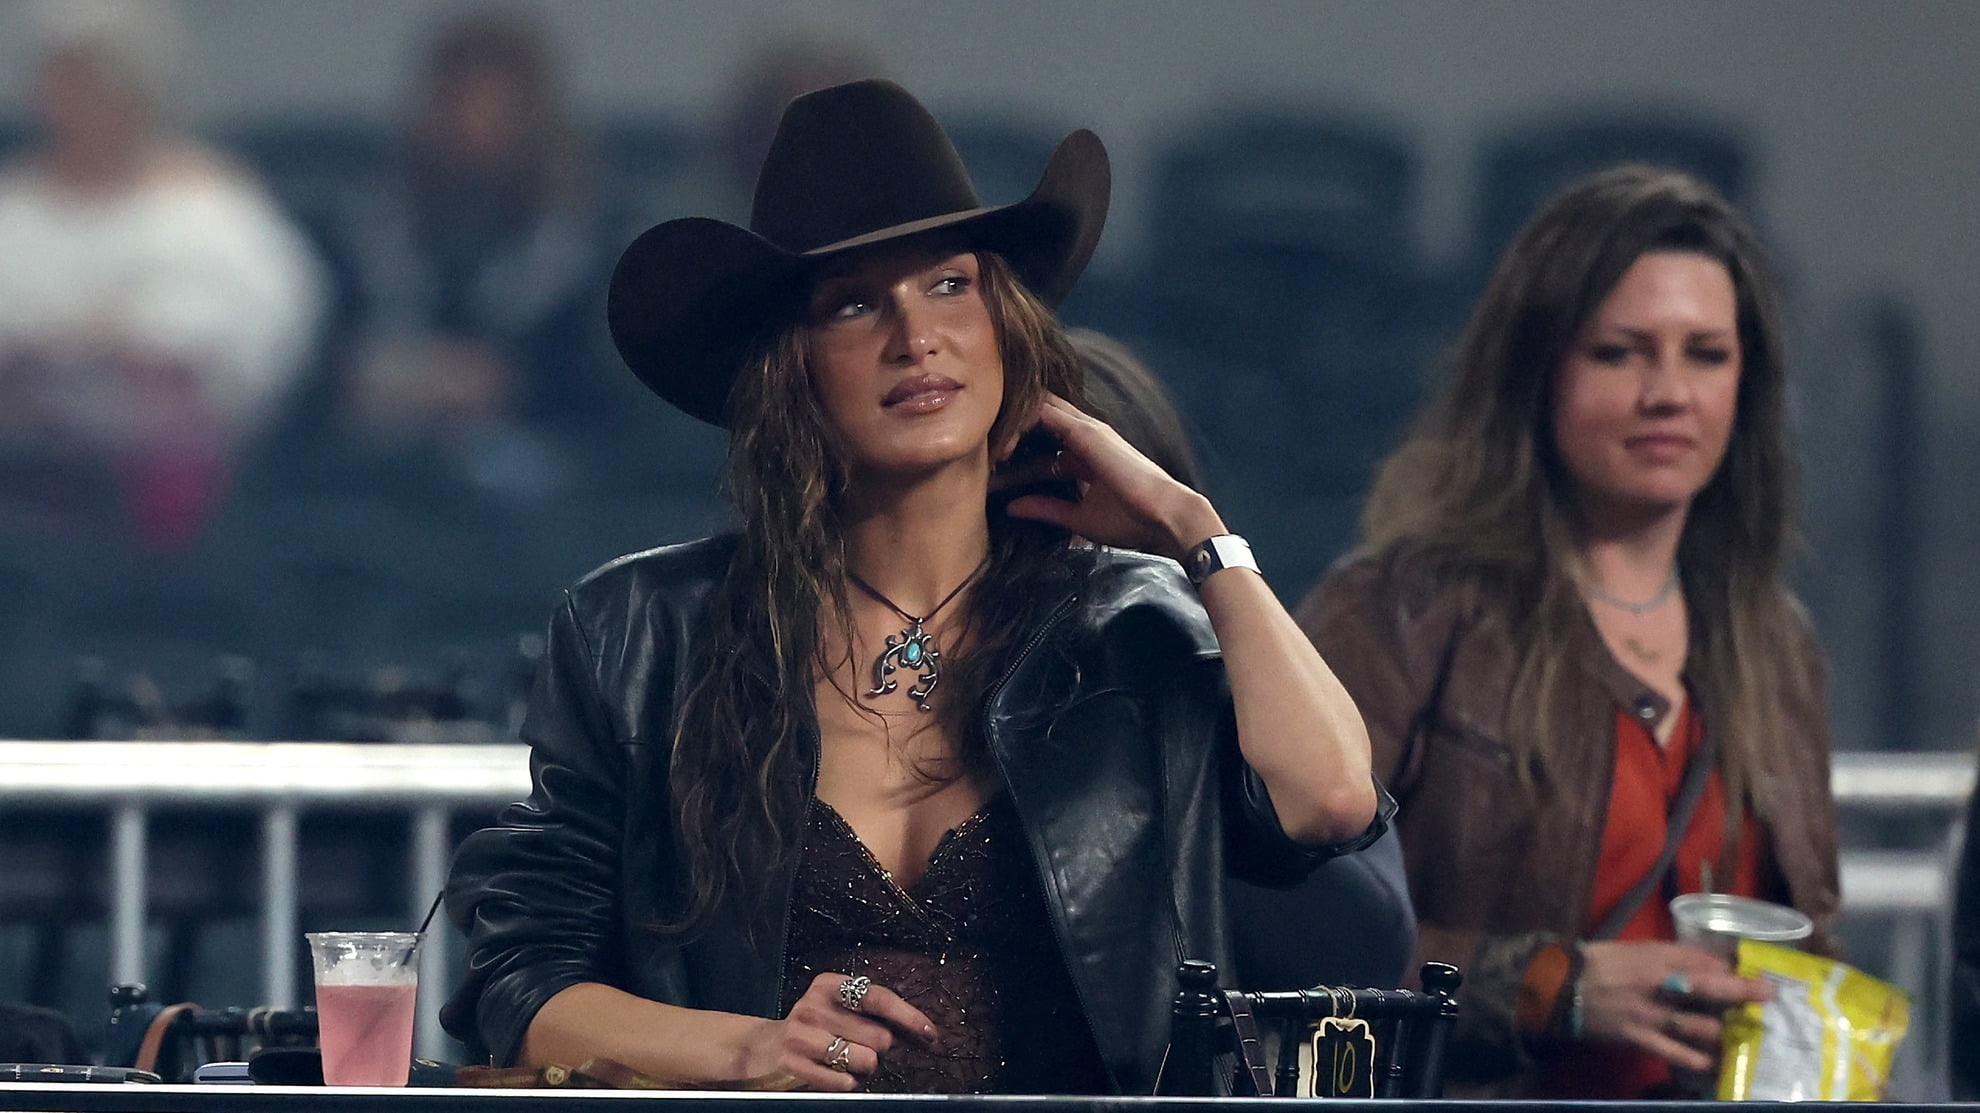 Bella Hadid Cowgirl Outfit